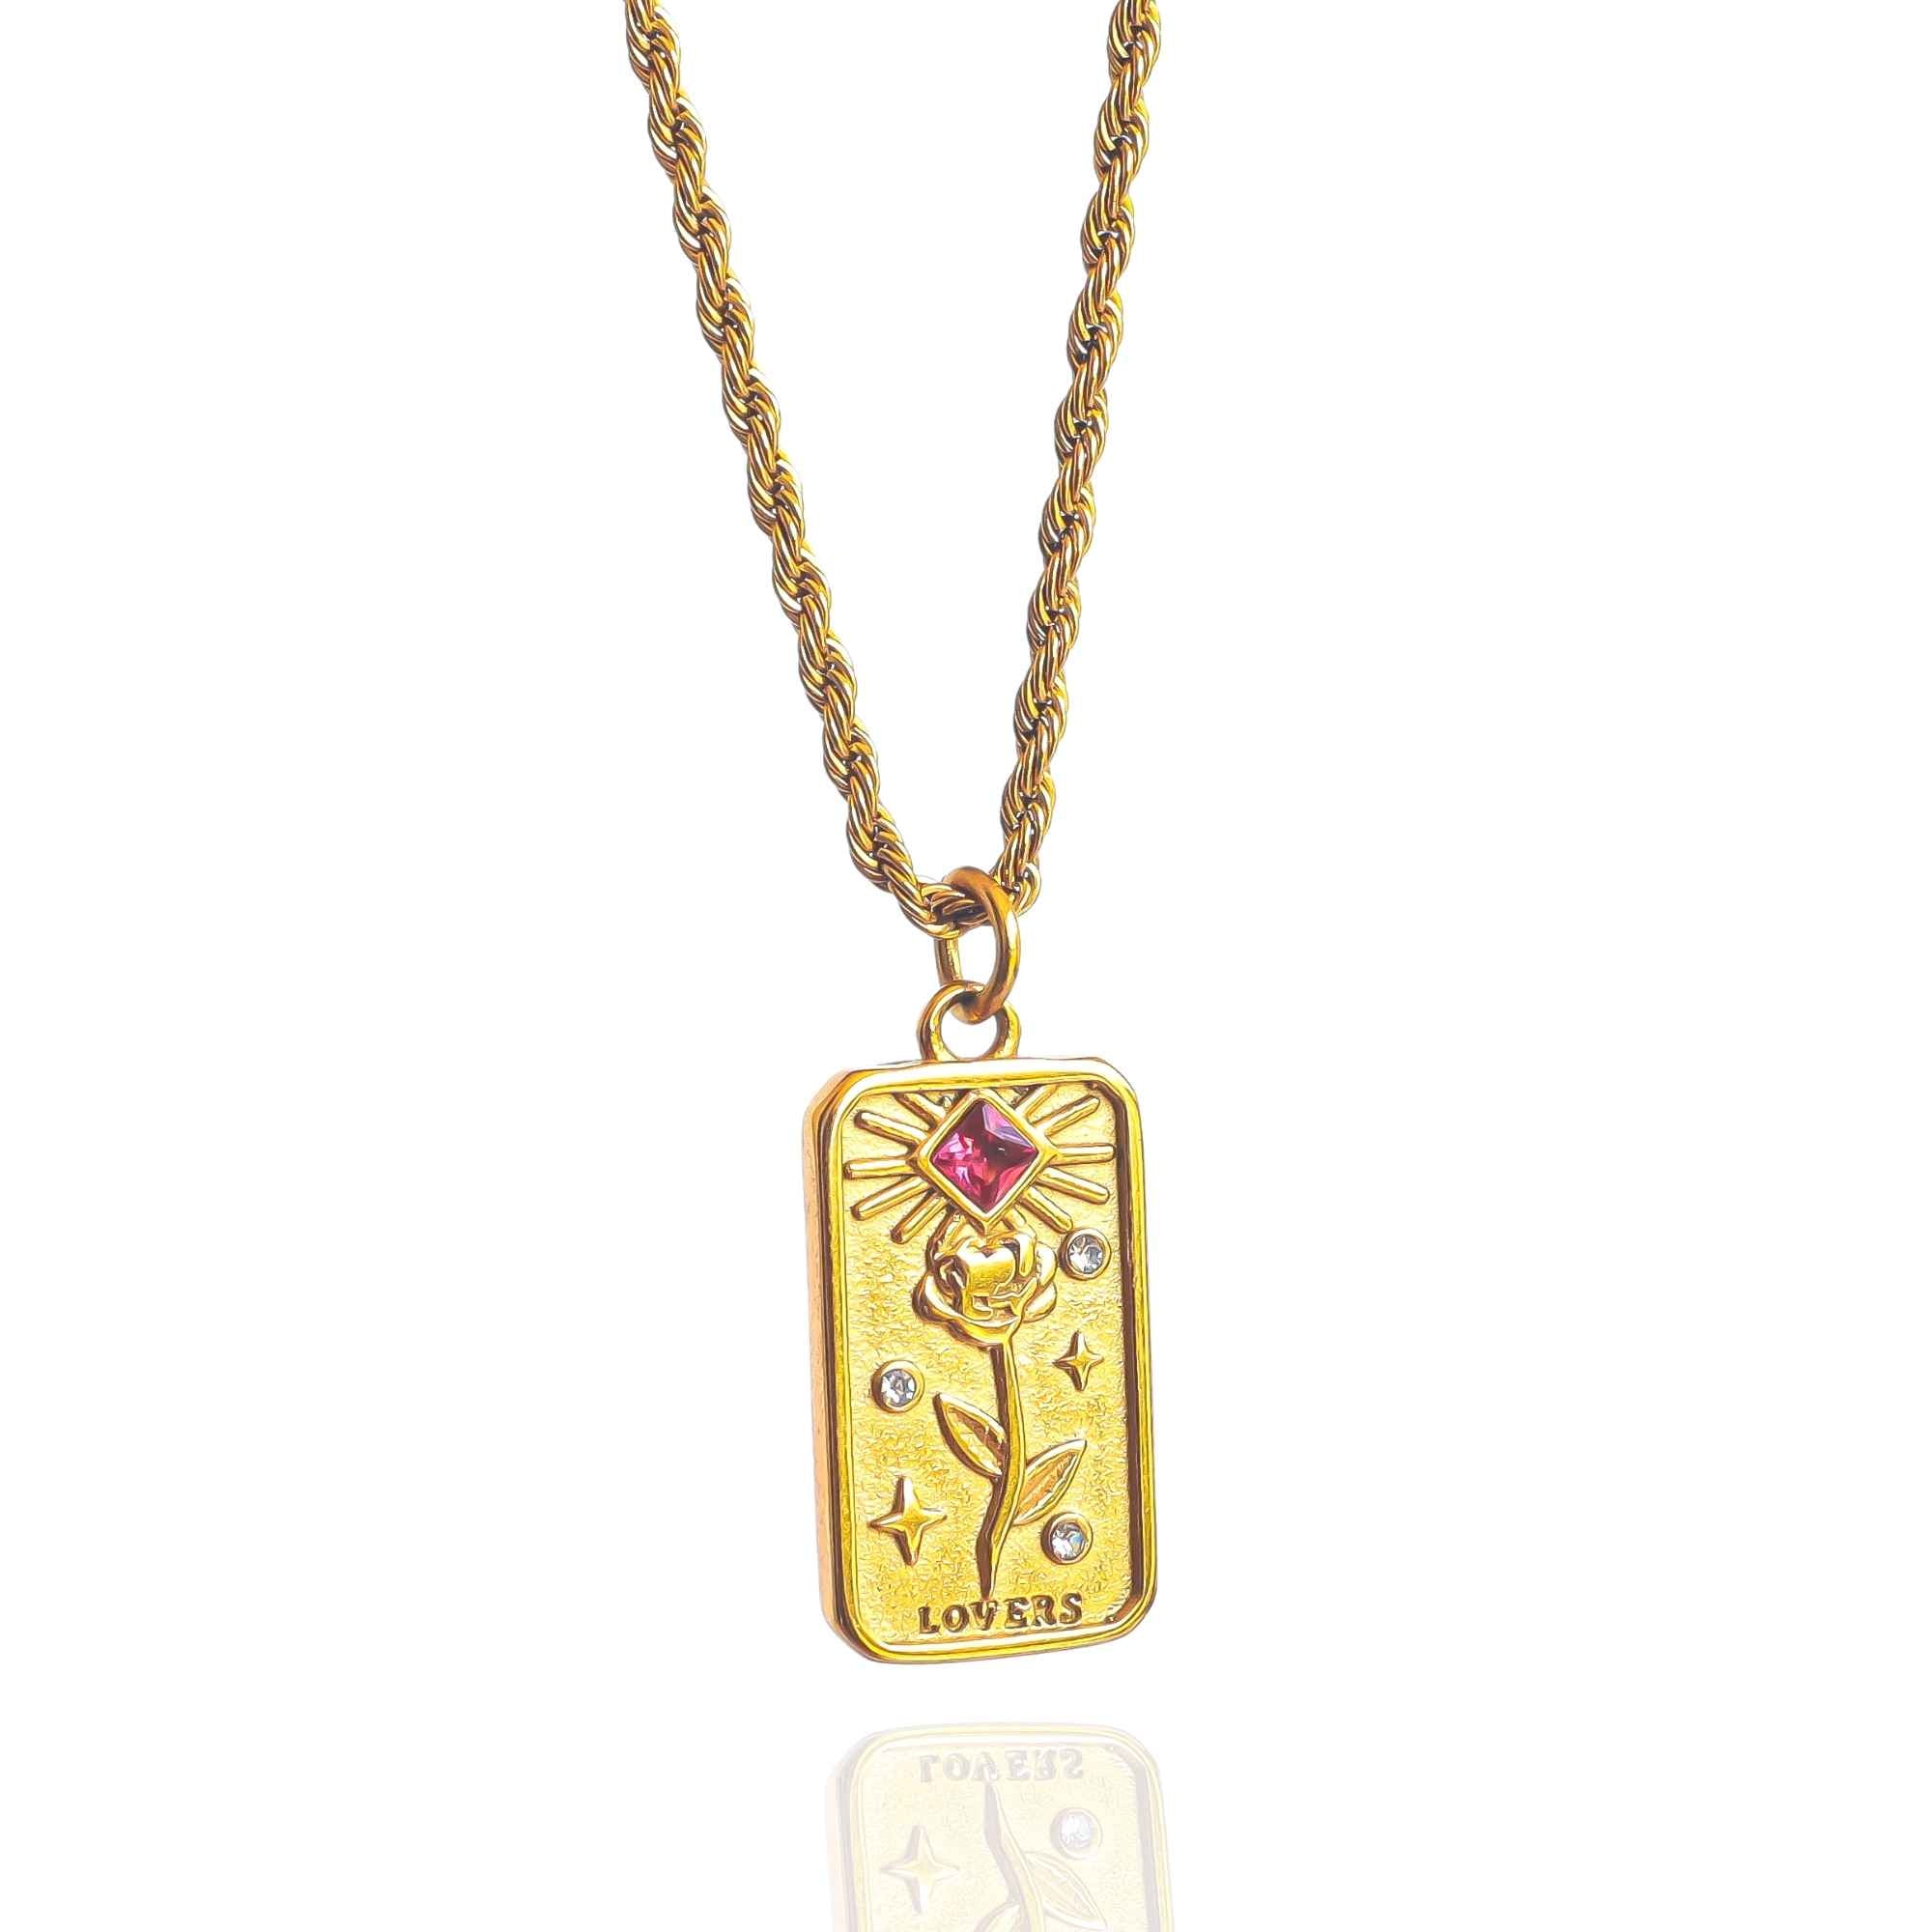 'THE LOVERS' Tarot Card Necklace